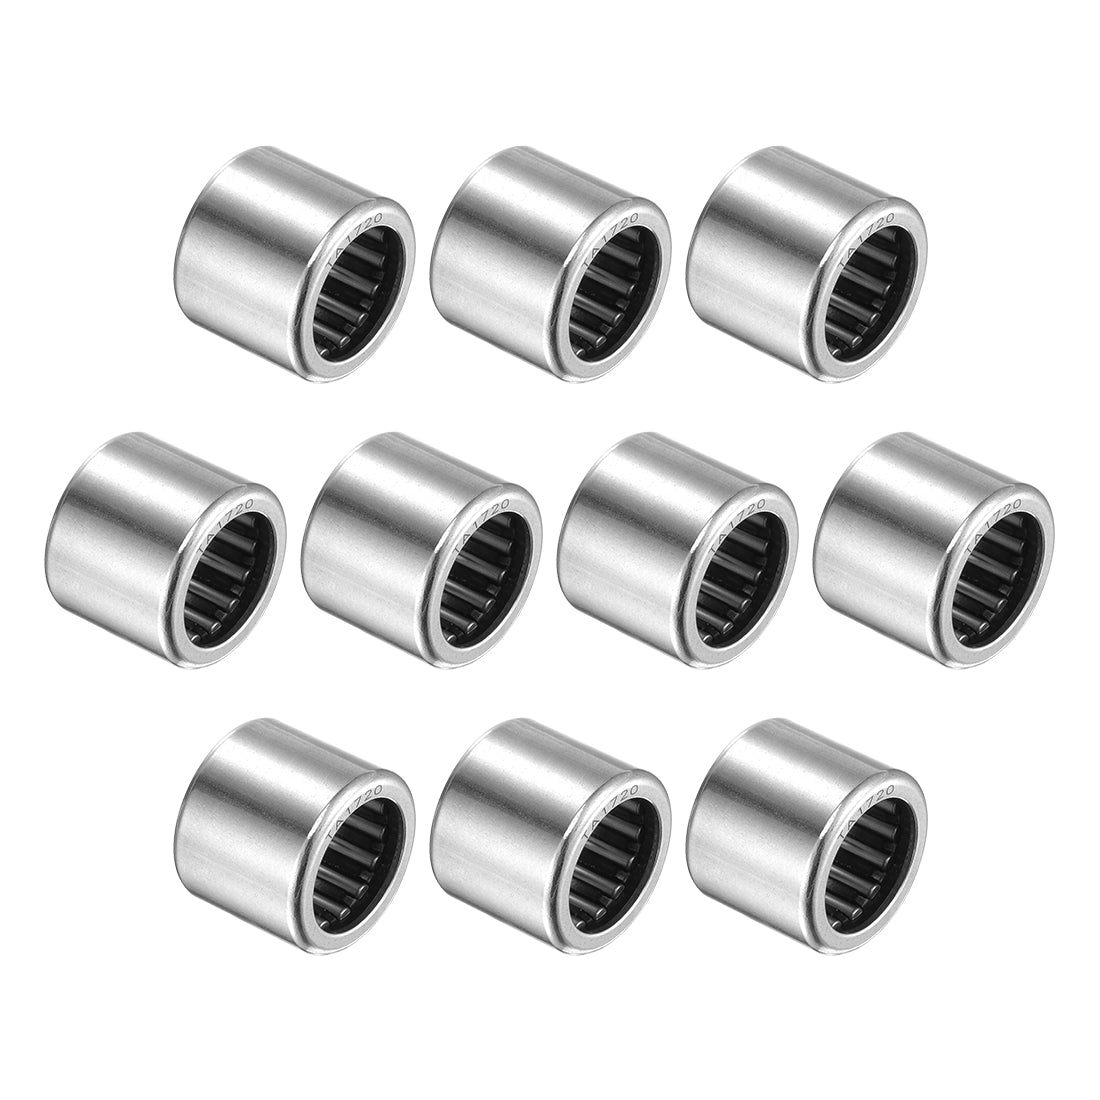 uxcell Uxcell TA1715 Needle Roller Bearings 17mm x 24mm x 15mm Chrome Steel Open End 10pcs